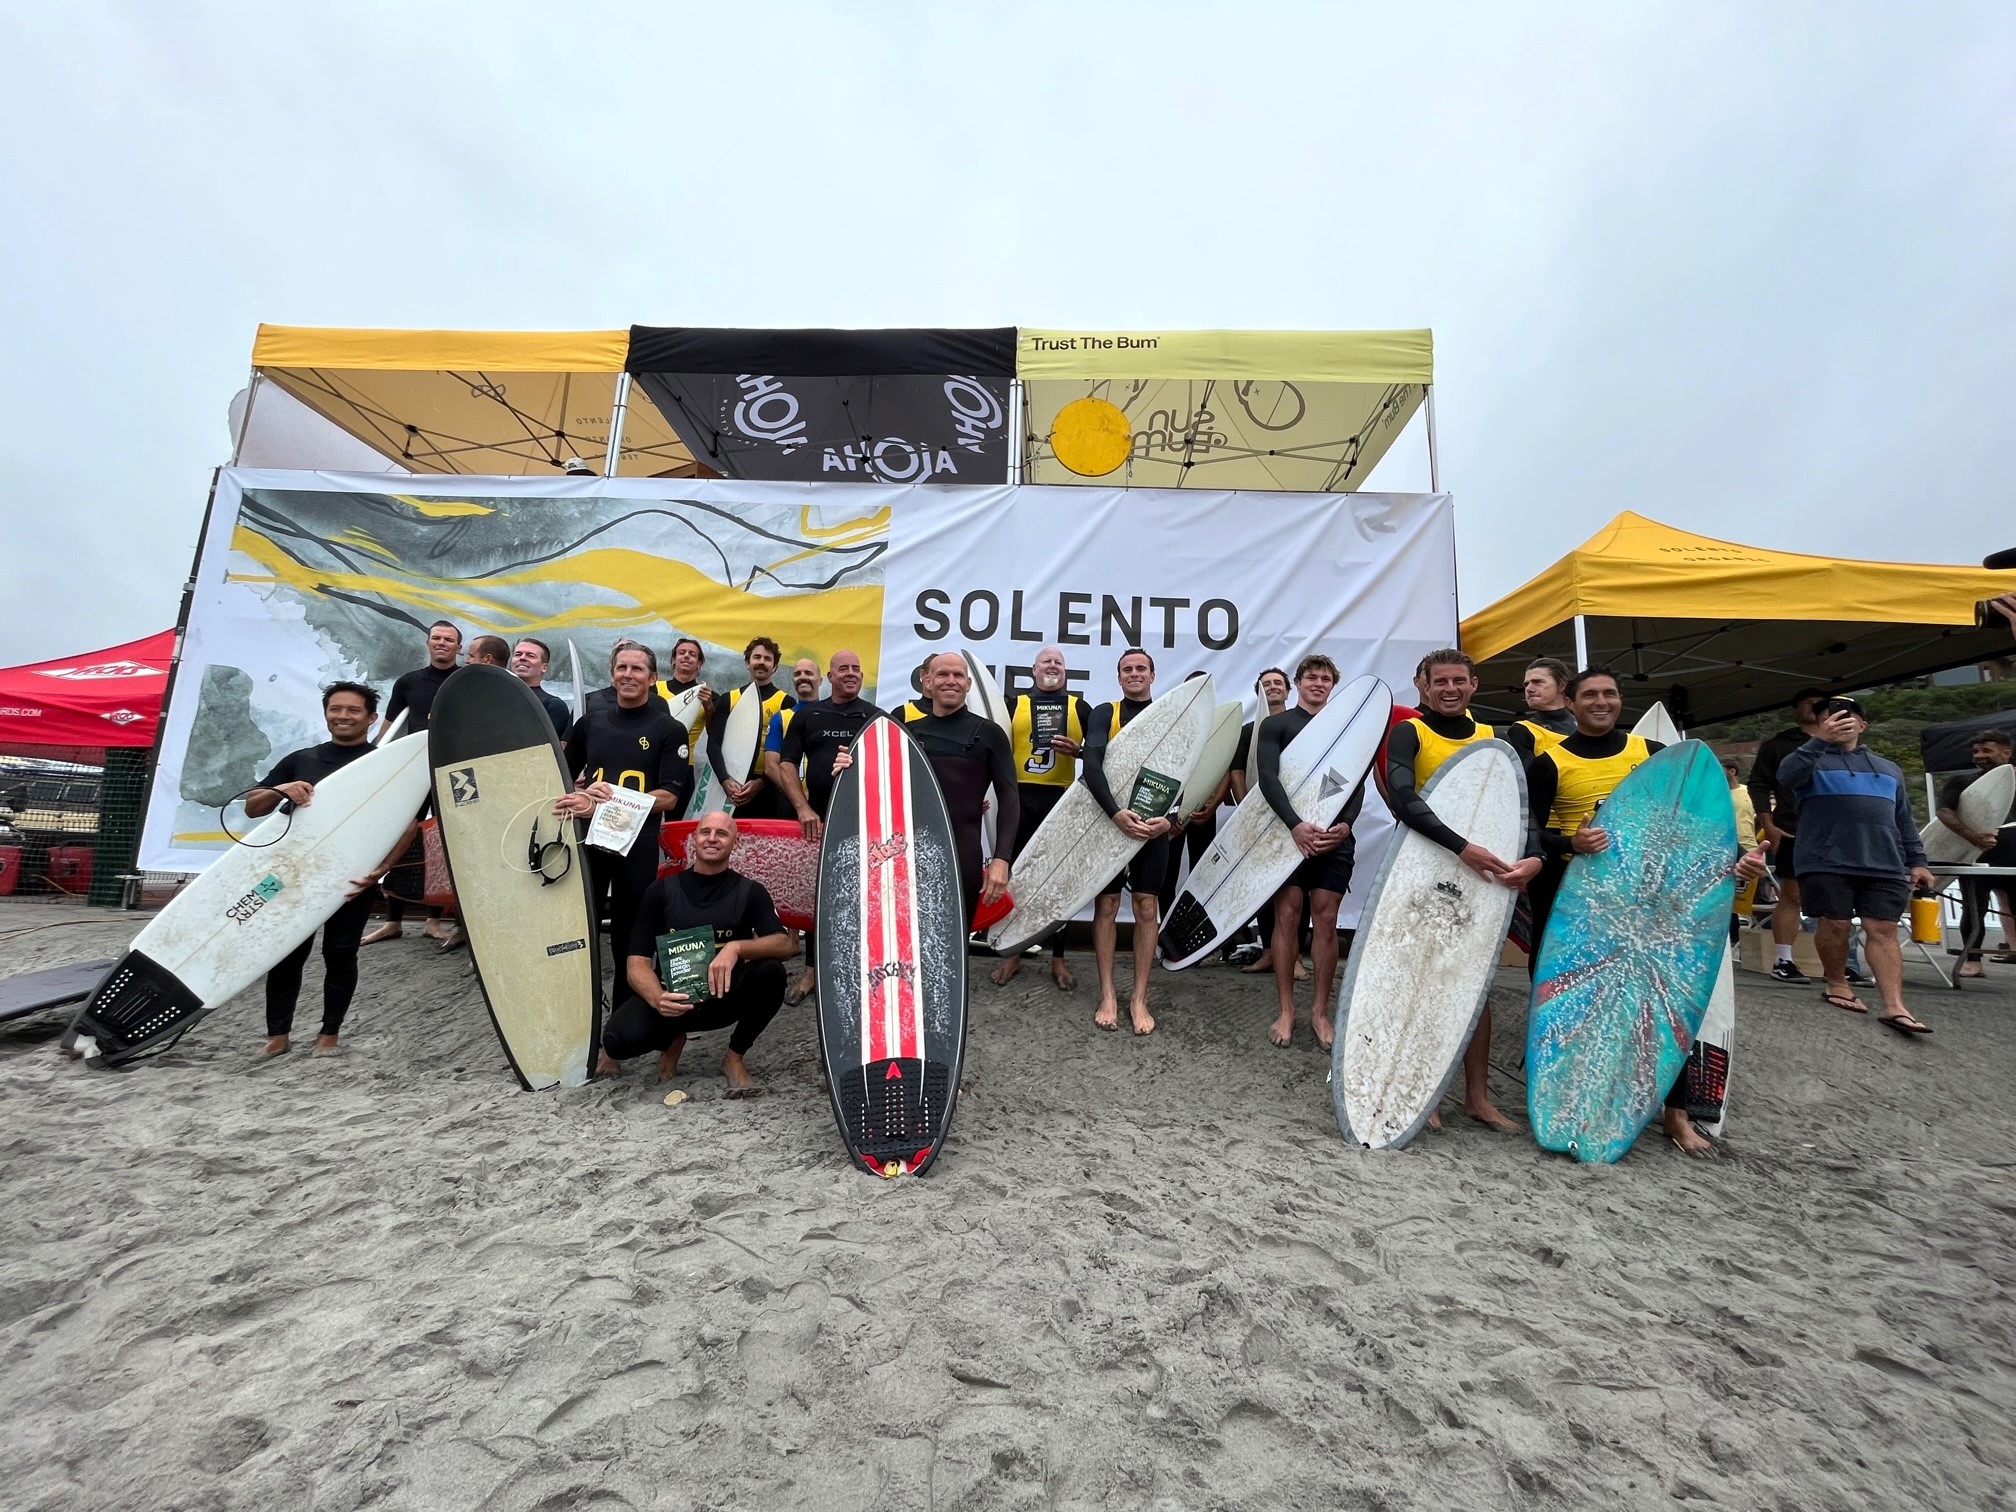 Solana Beach Marine Safety Captain Leads Lifeguards to Victory at the Solento Surf Festival